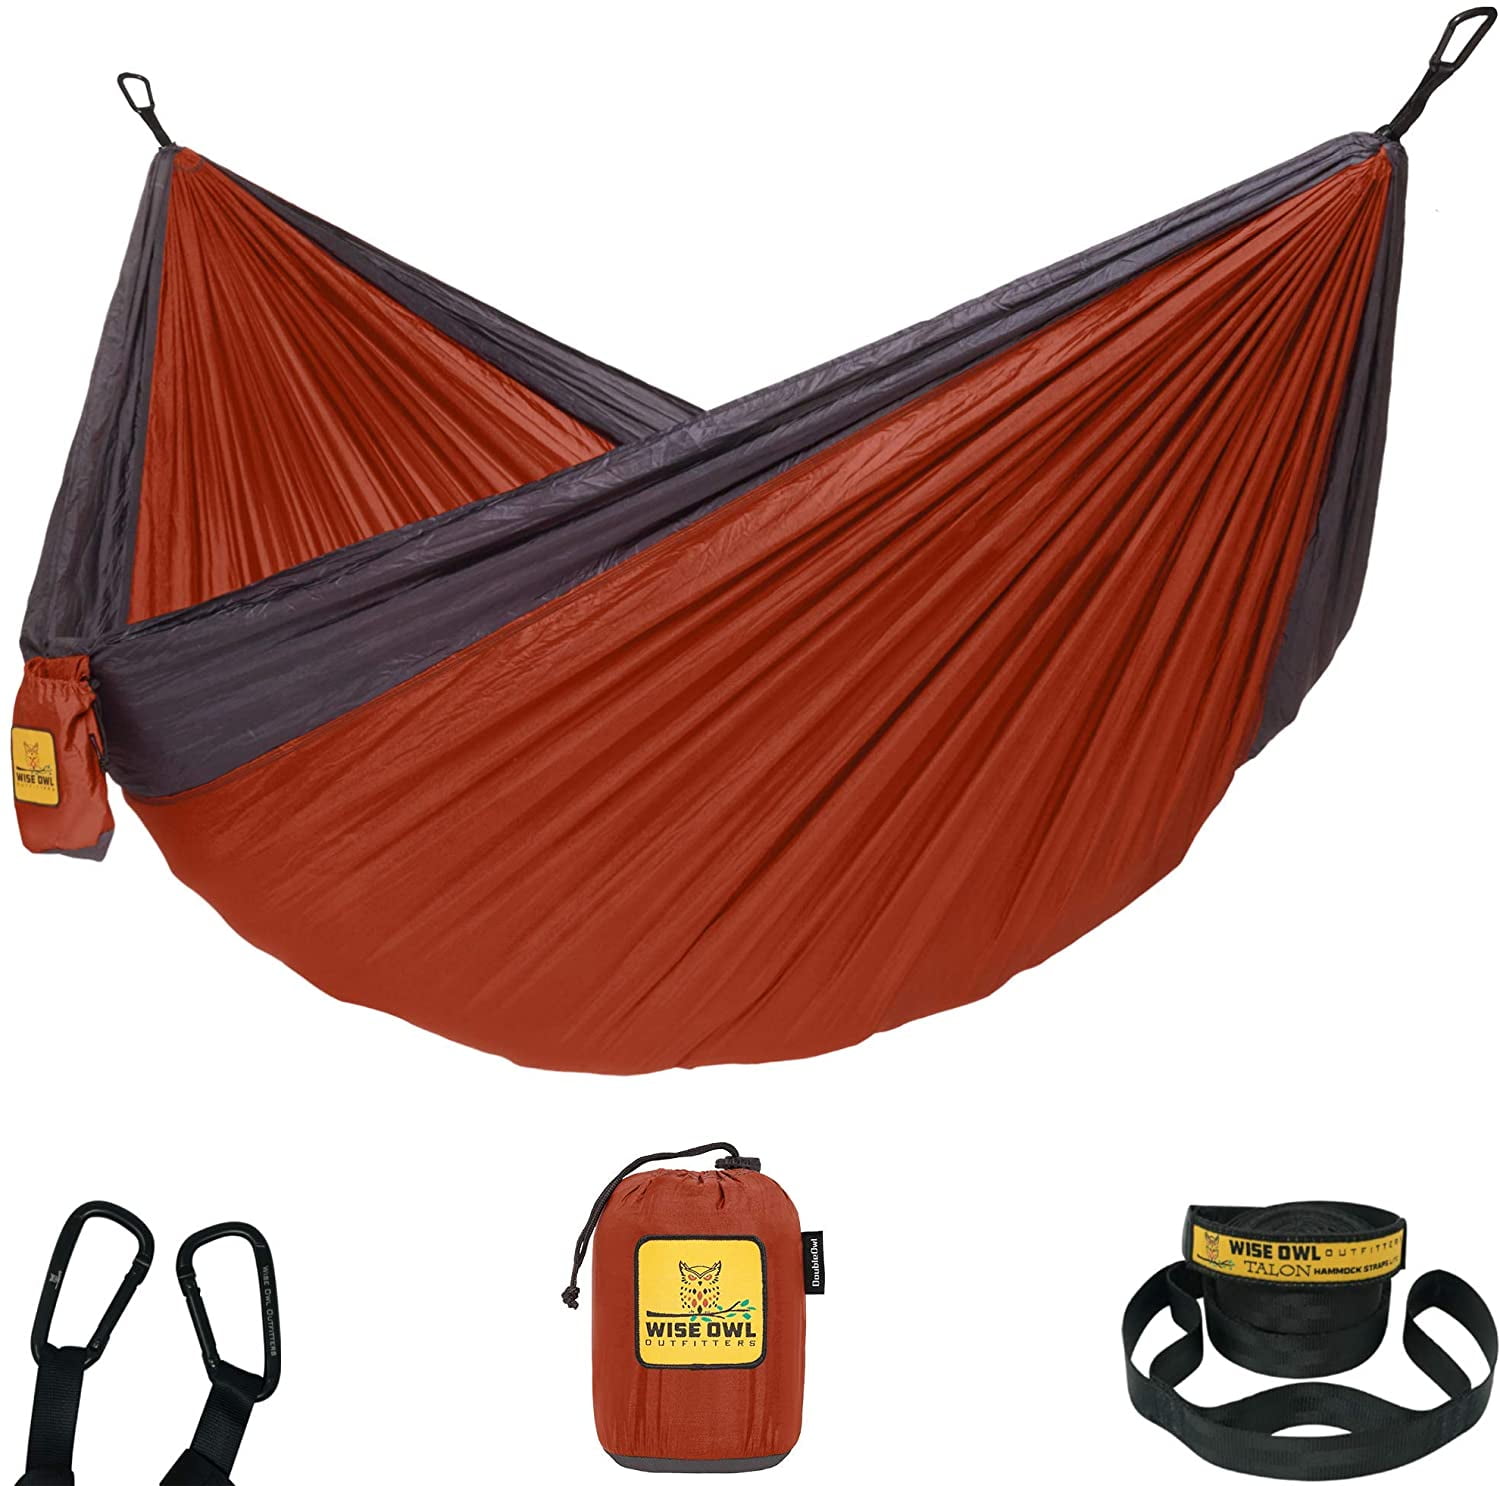 USA Based Wise Owl Outfitters Hammock Camping Double & Single with Tree Straps